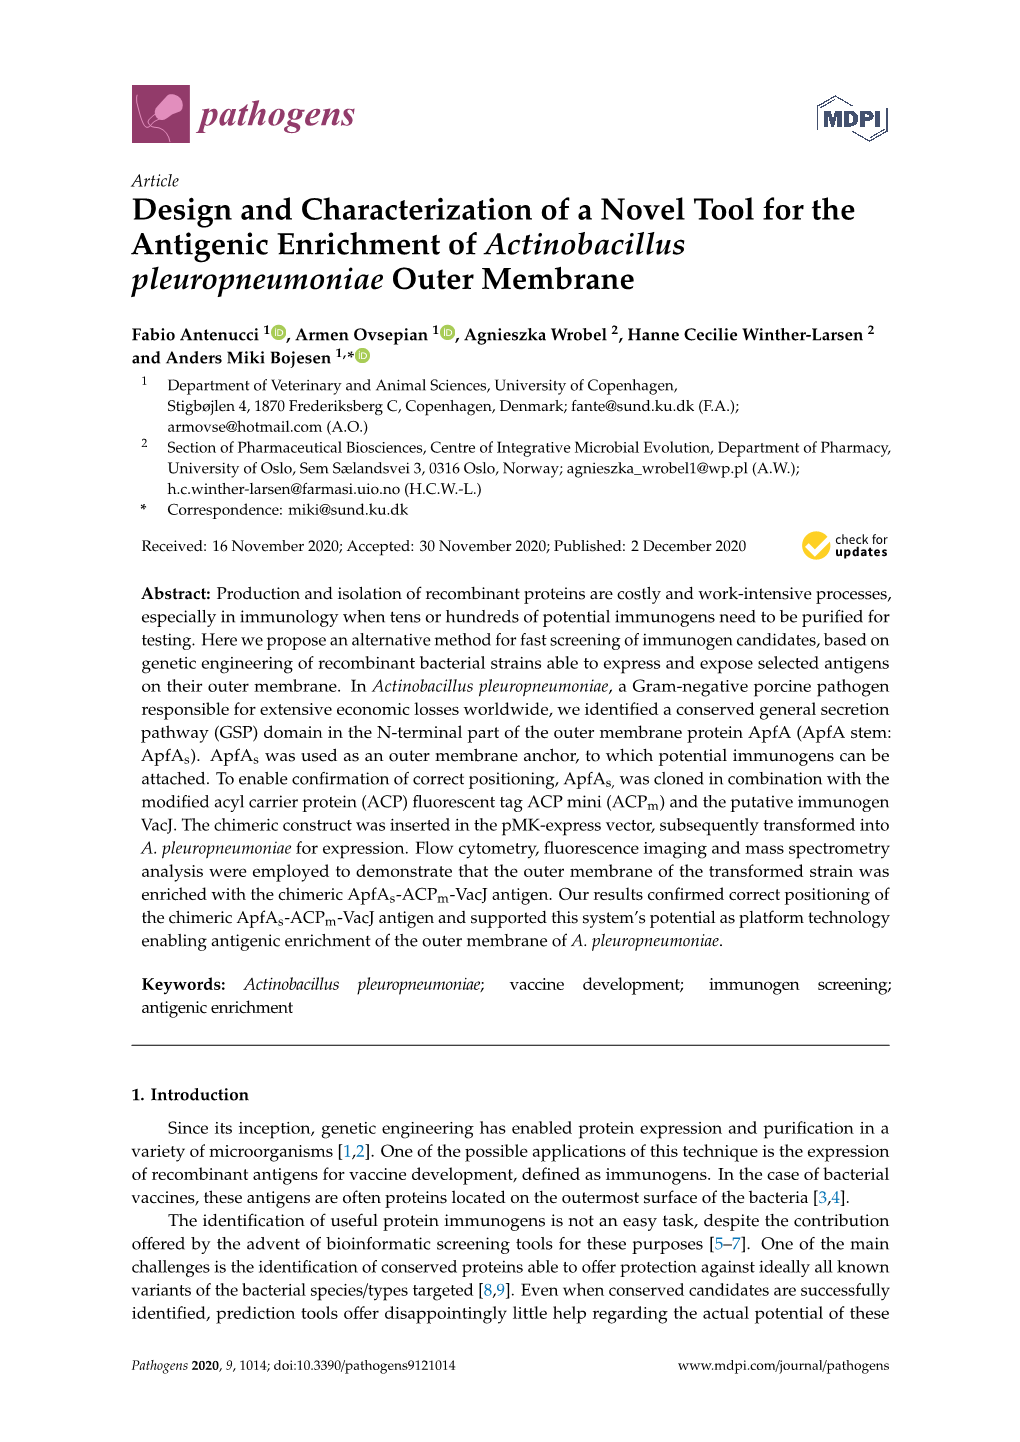 Design and Characterization of a Novel Tool for the Antigenic Enrichment of Actinobacillus Pleuropneumoniae Outer Membrane